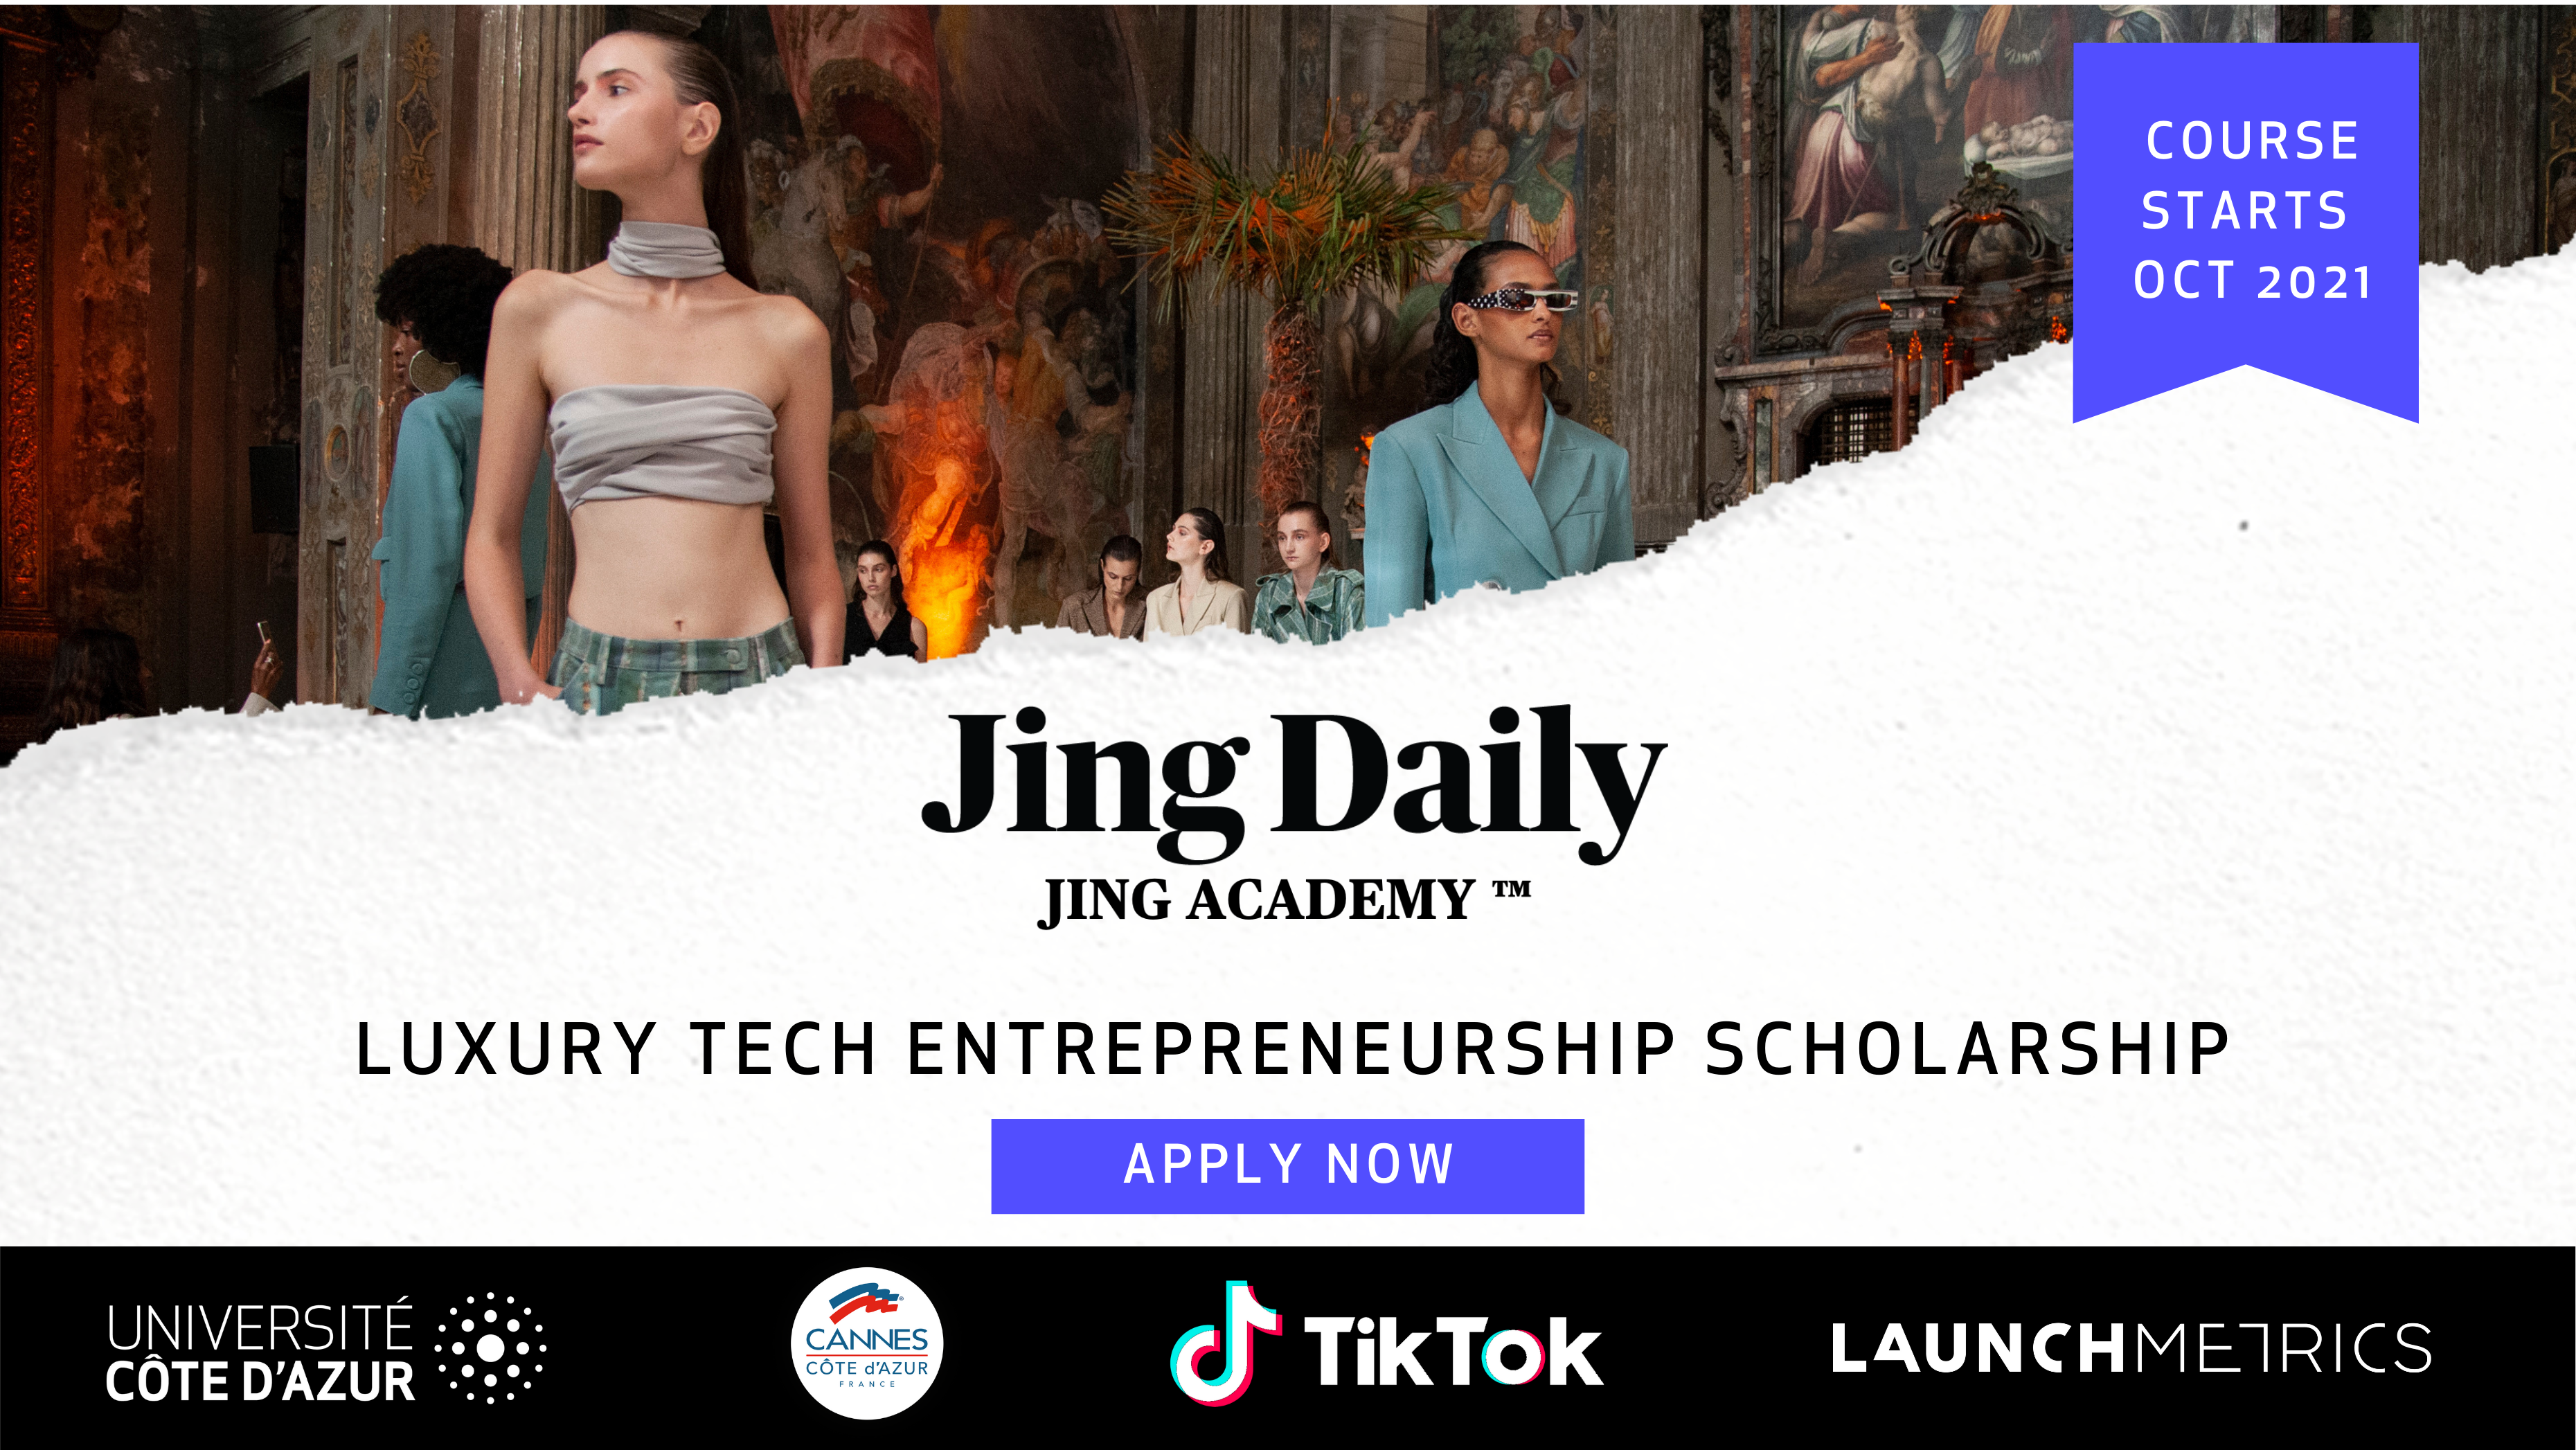 Jing Daily and Launchmetrics are offering one selected reader the opportunity to win a full scholarship at the University of Côte d’Azur, Cannes.
